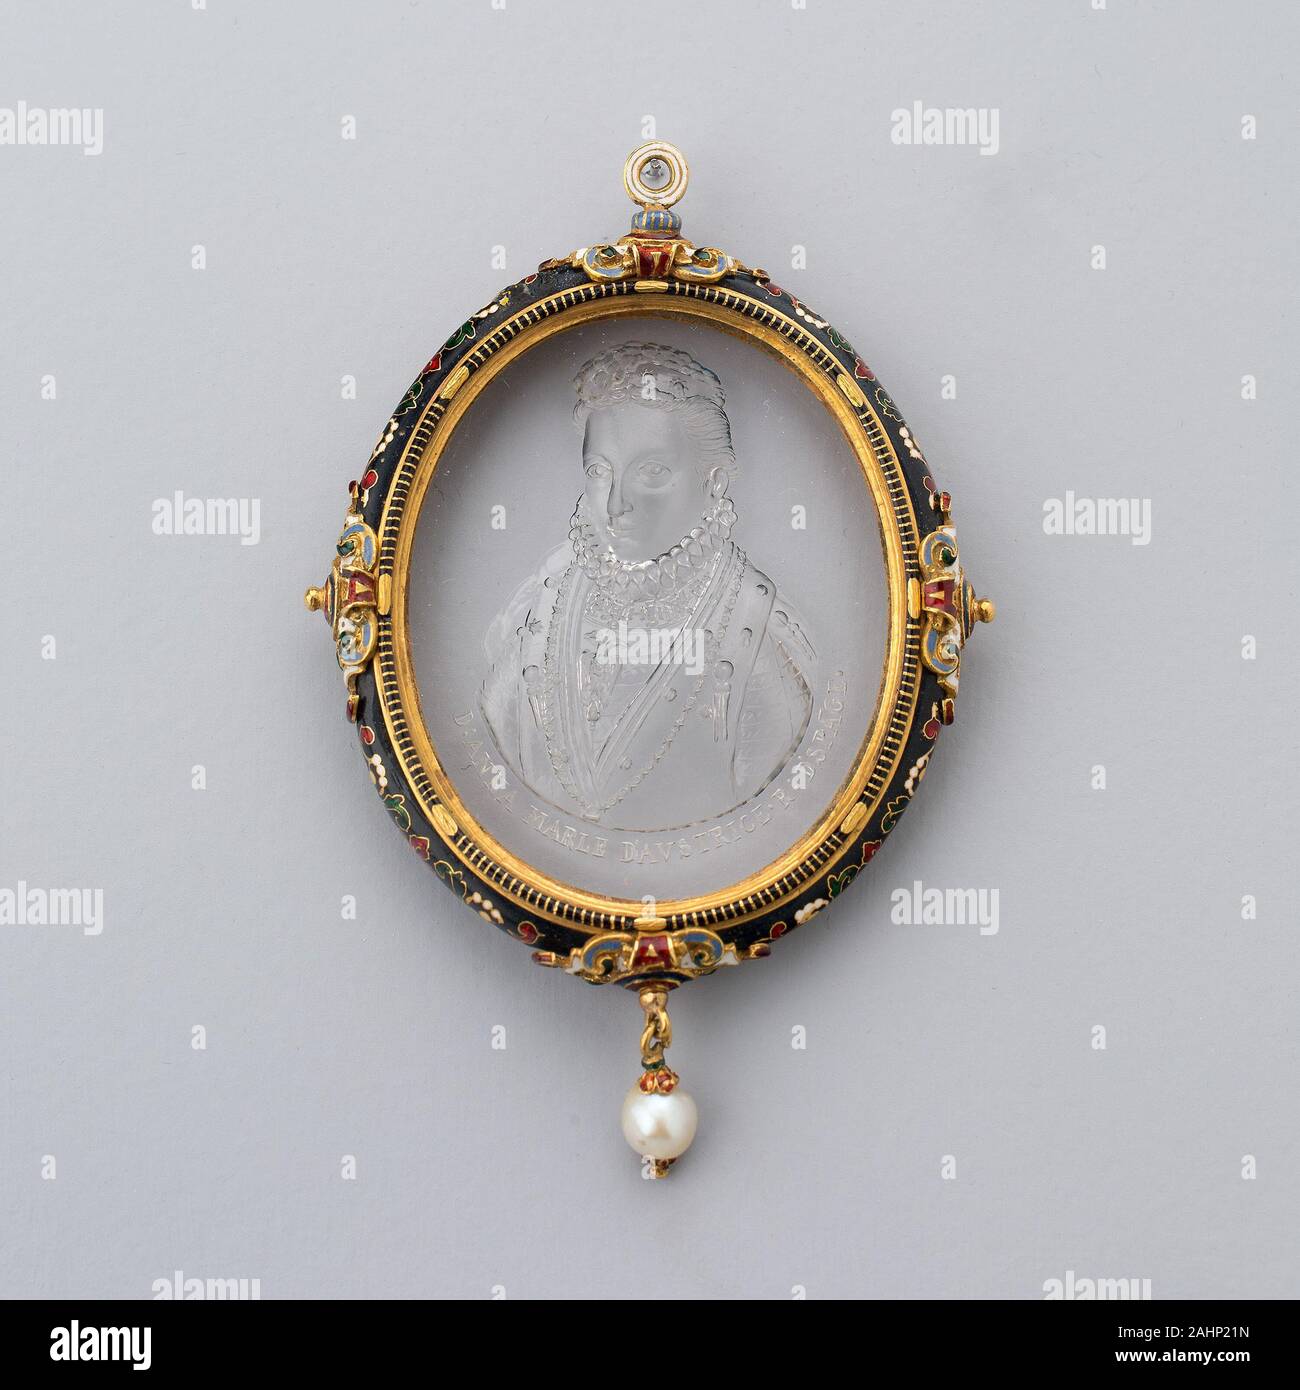 Pendant with Intaglio Portrait of Anna of Austria in Enameled Frame. 1800–1899. France. Intaglio rock crystalFrame enamel, glass, gold, and pearl This portrait had been thought to date about 1570, when Anna Maria of Austria married King Phillip II of Spain. It is likely, however, this refined intaglio image was carved after a contemporary painting but in the nineteenth century. The frame executed in a delicate process known as émail en résille sur verre emulated a seventeenth-century technique but was certainly done in the nineteenth century. Stock Photo